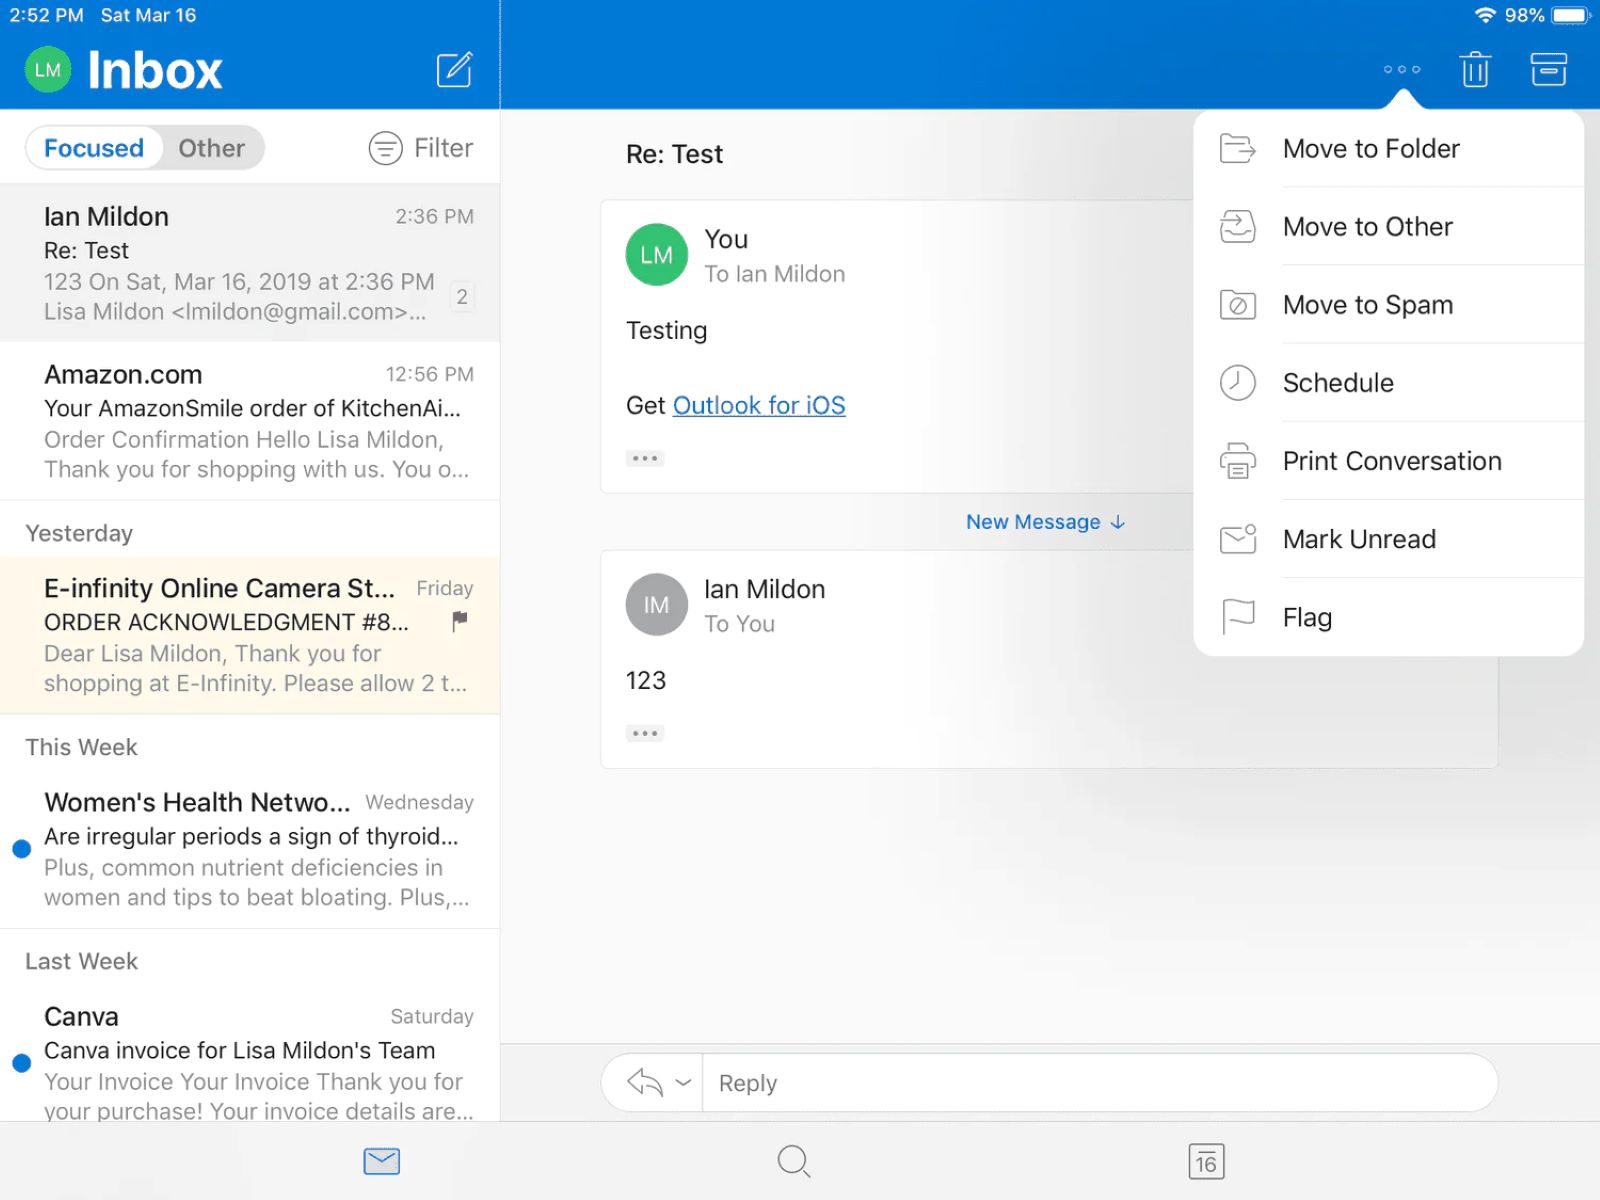 How To Schedule Sending An Email In Outlook